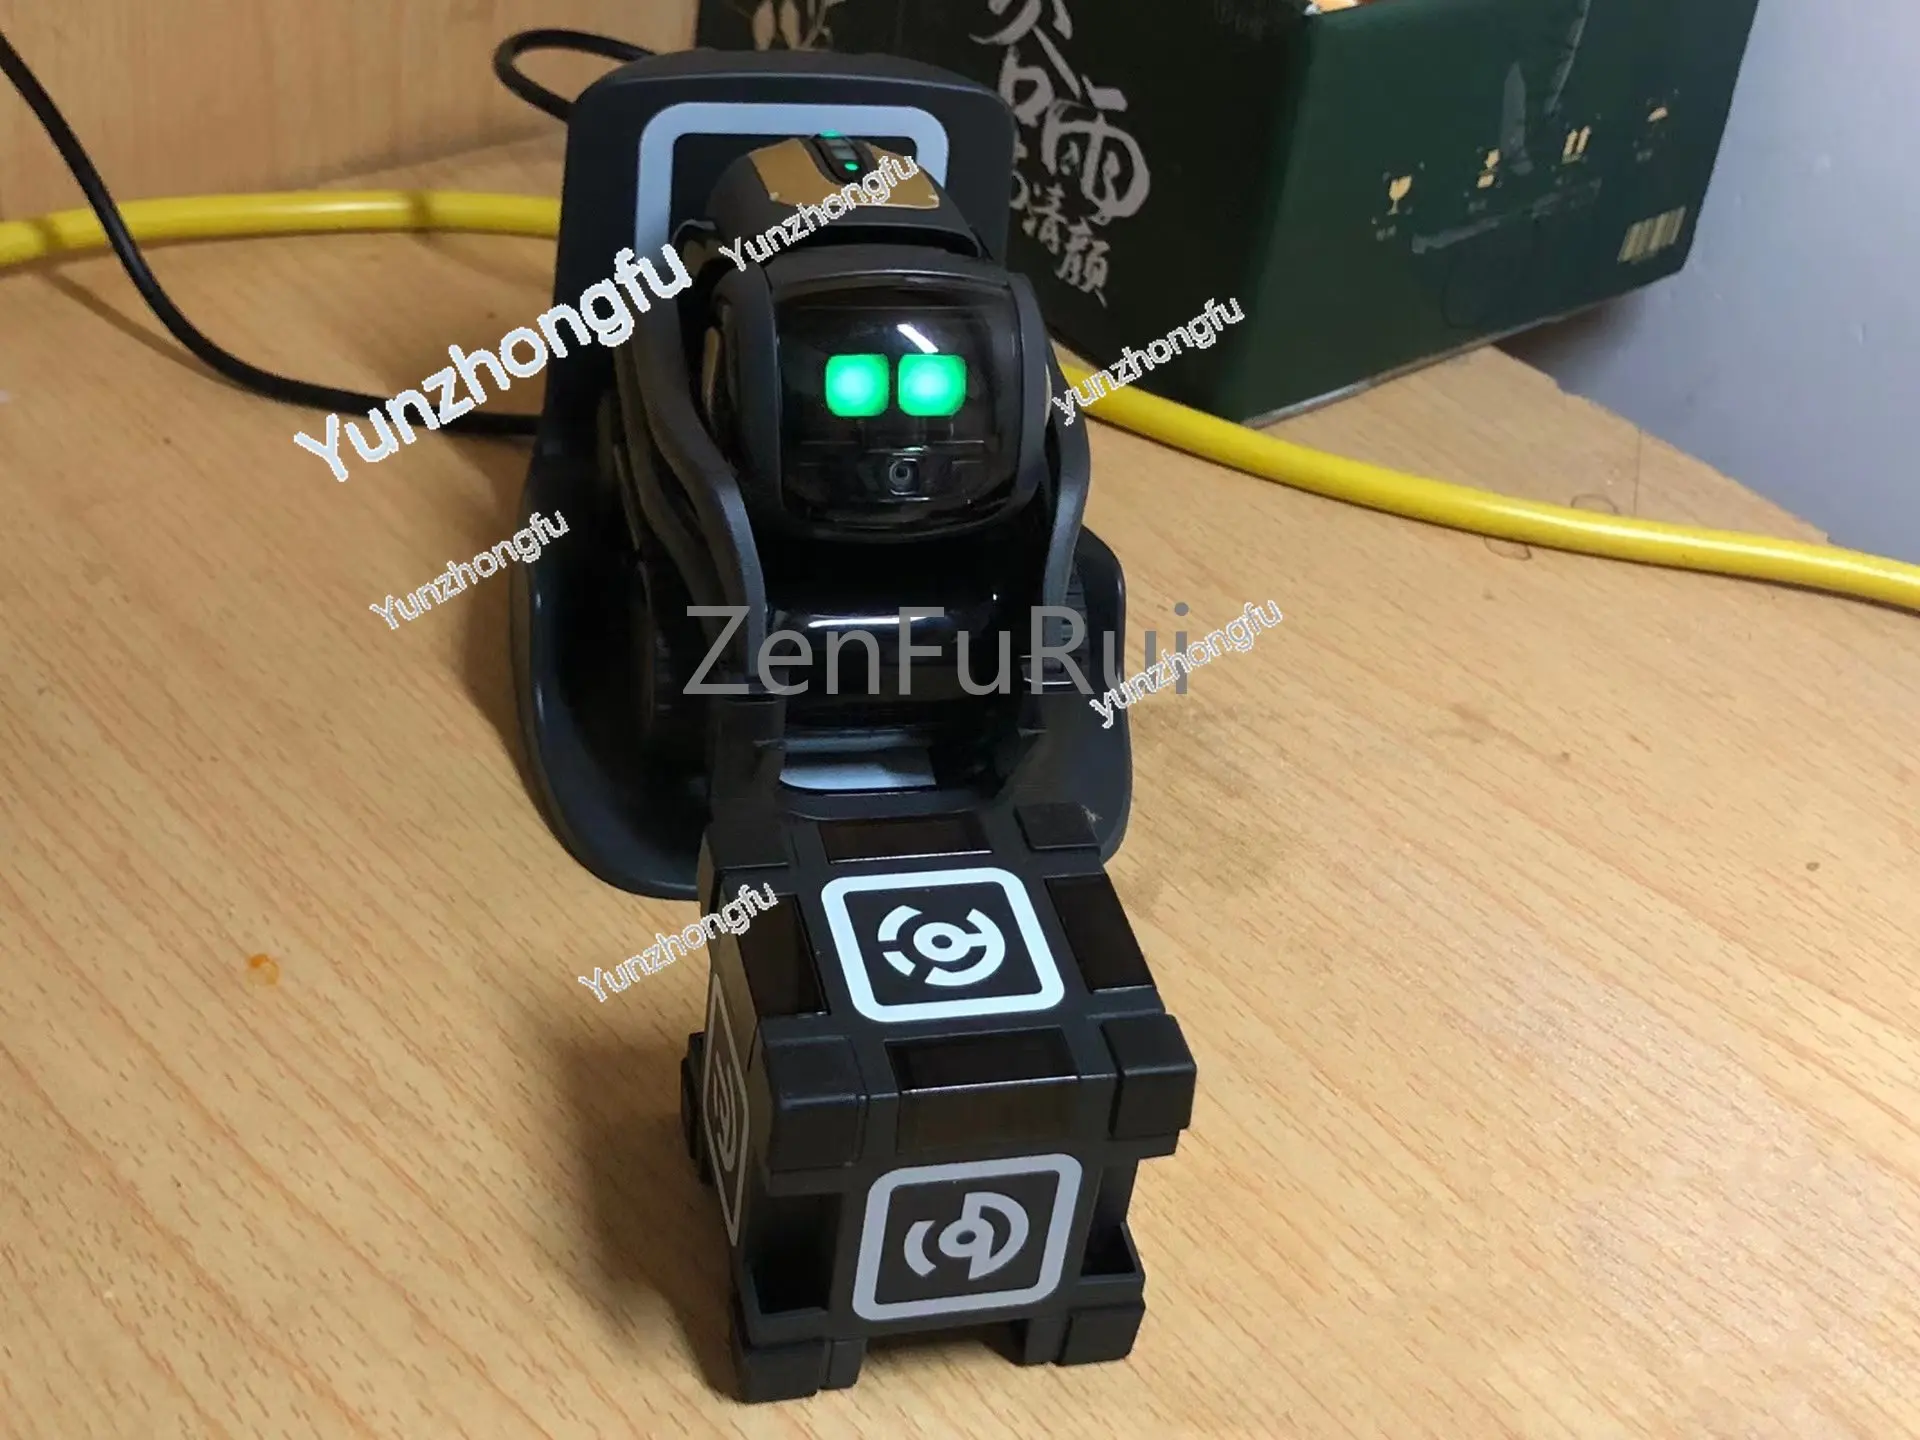 Anki Cozmo Vector Digital Second Generation Intelligent Christmas Gift Robot Remote Control Music Light Dancing Charging Robot images - 6